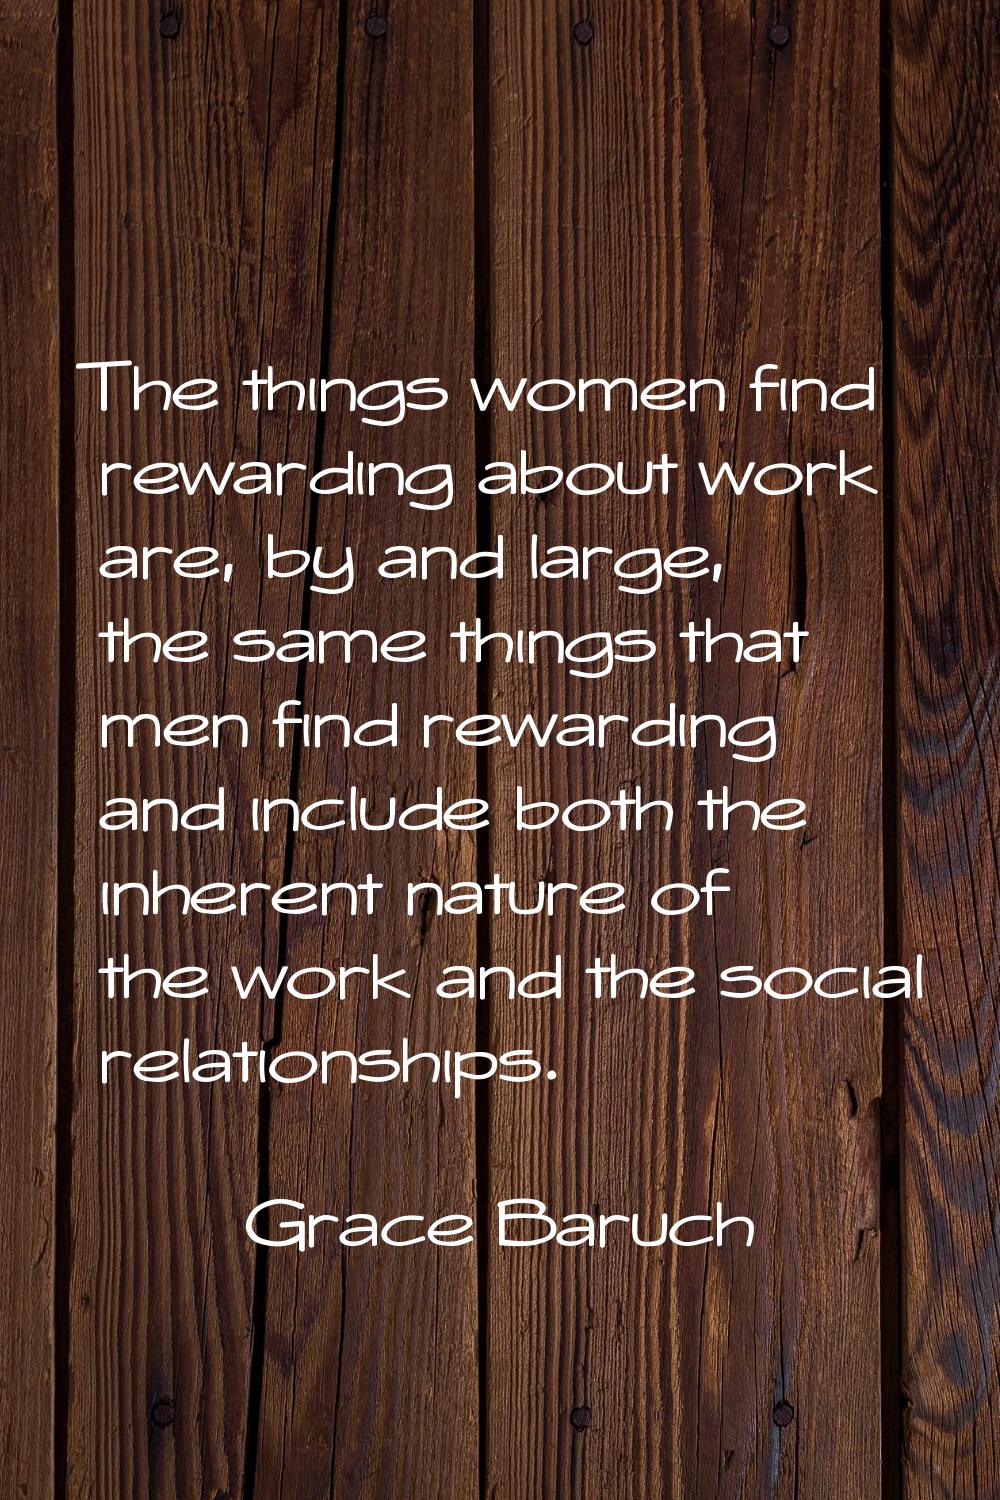 The things women find rewarding about work are, by and large, the same things that men find rewardi